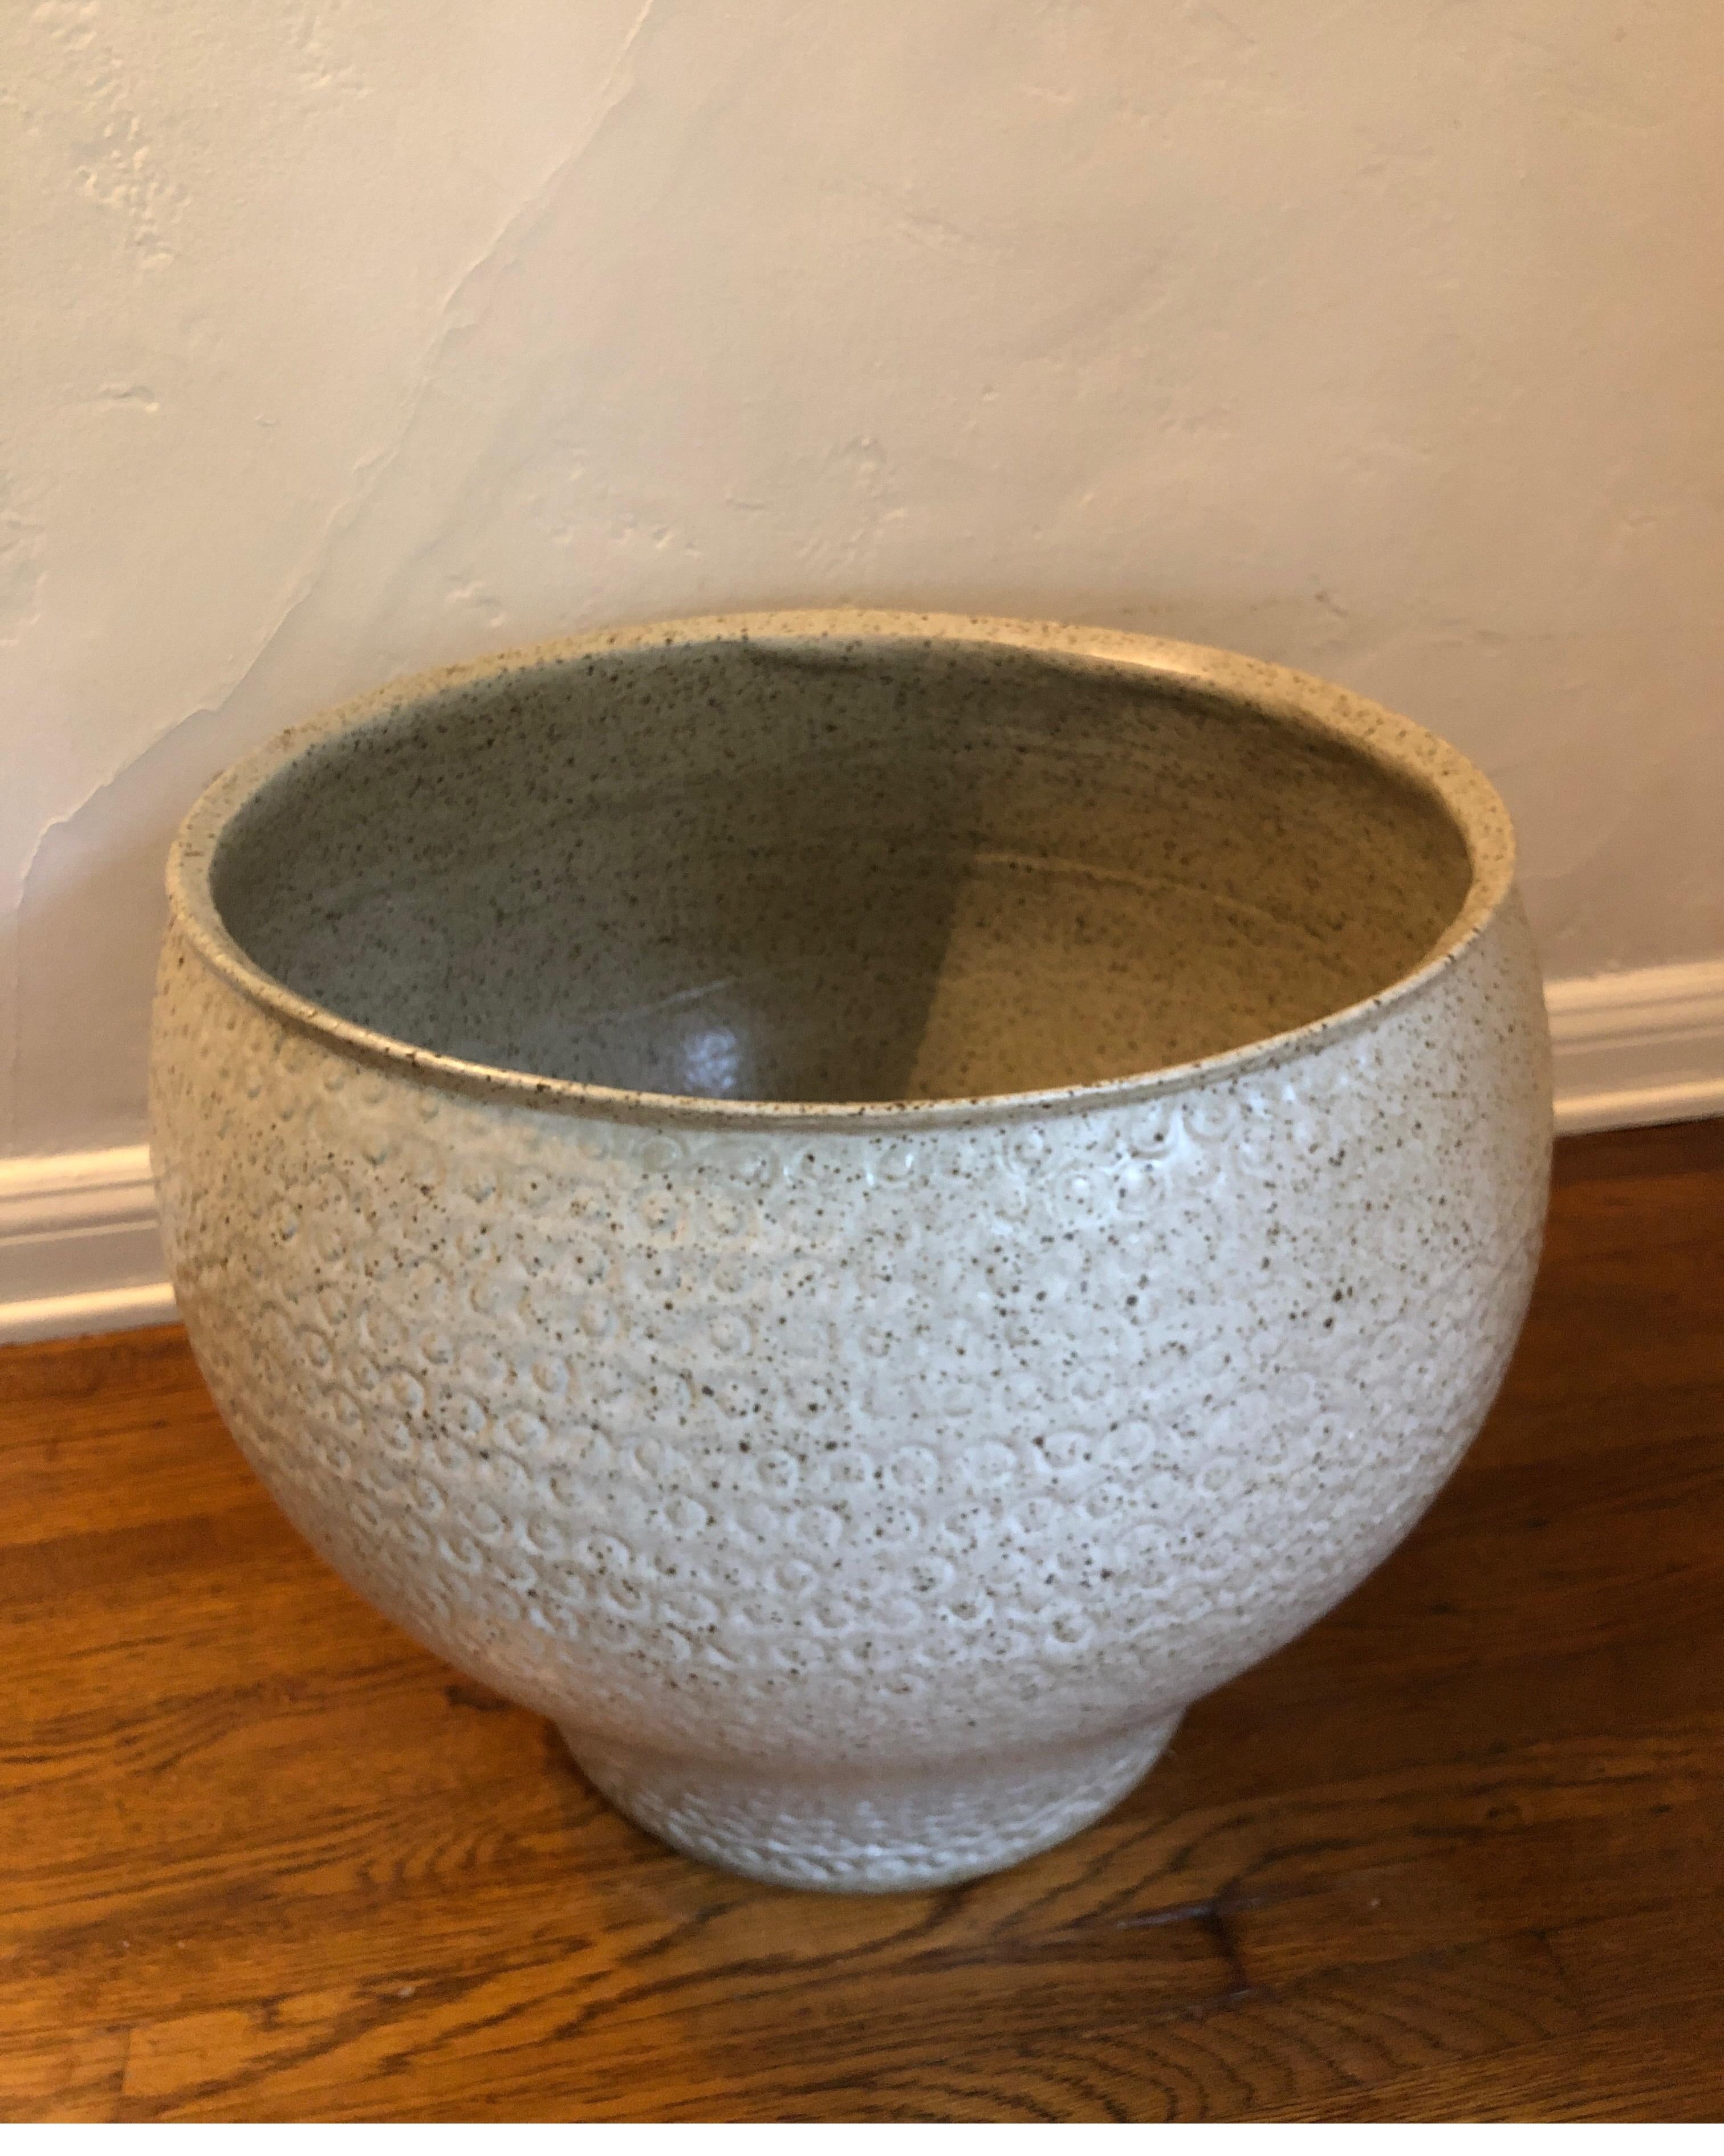 Mid-Century Modern, American Cheerio planter by David Cressey for Architectural Pottery, 1960
Measures: 18.5” D x 15.5 H.